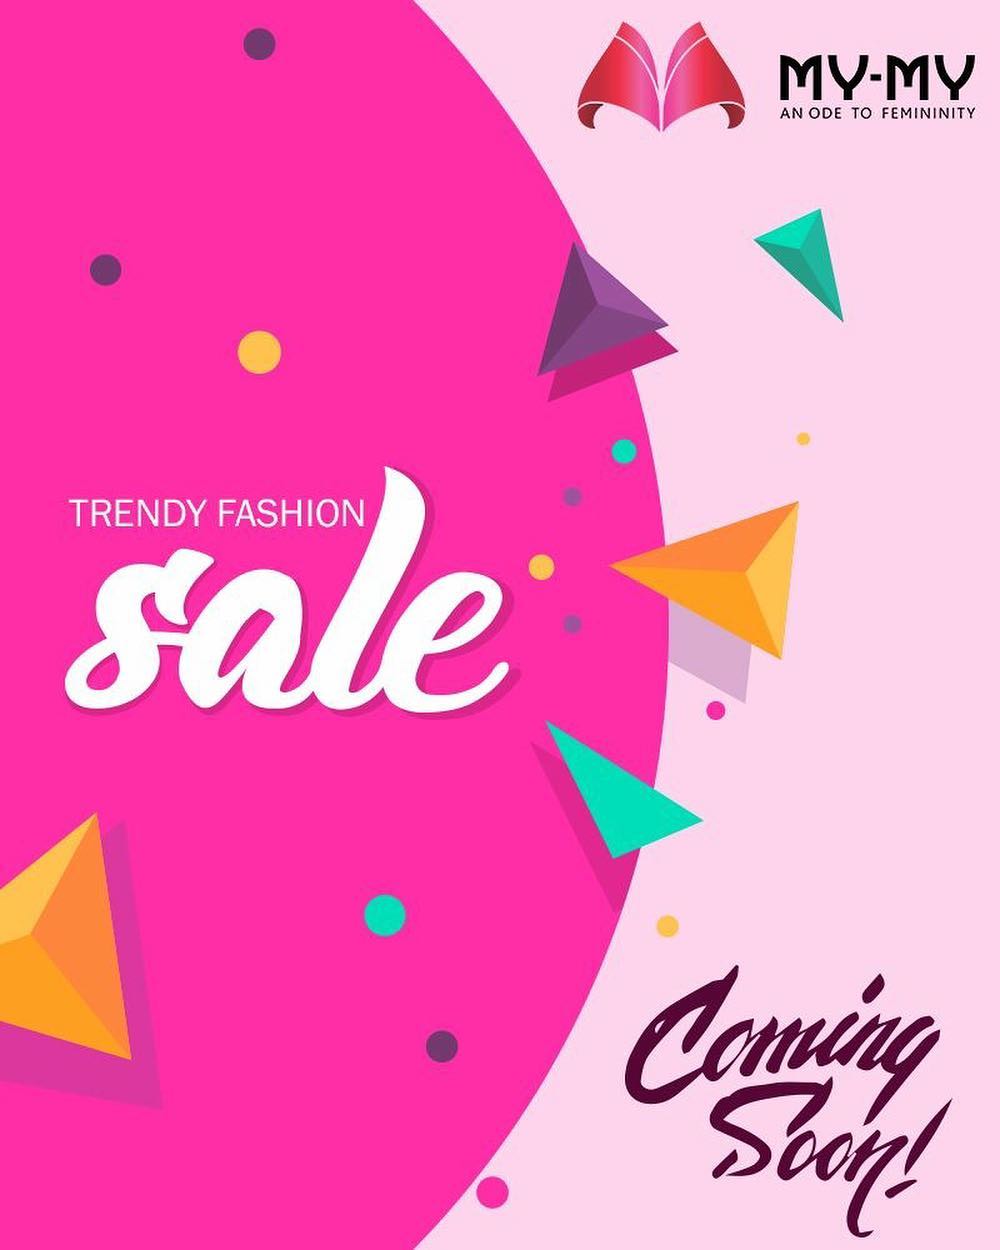 Great deals on your favorite store coming soon

#MyMy #MyMyAhmedabad #Fashion #Ahmedabad #FemaleFashion